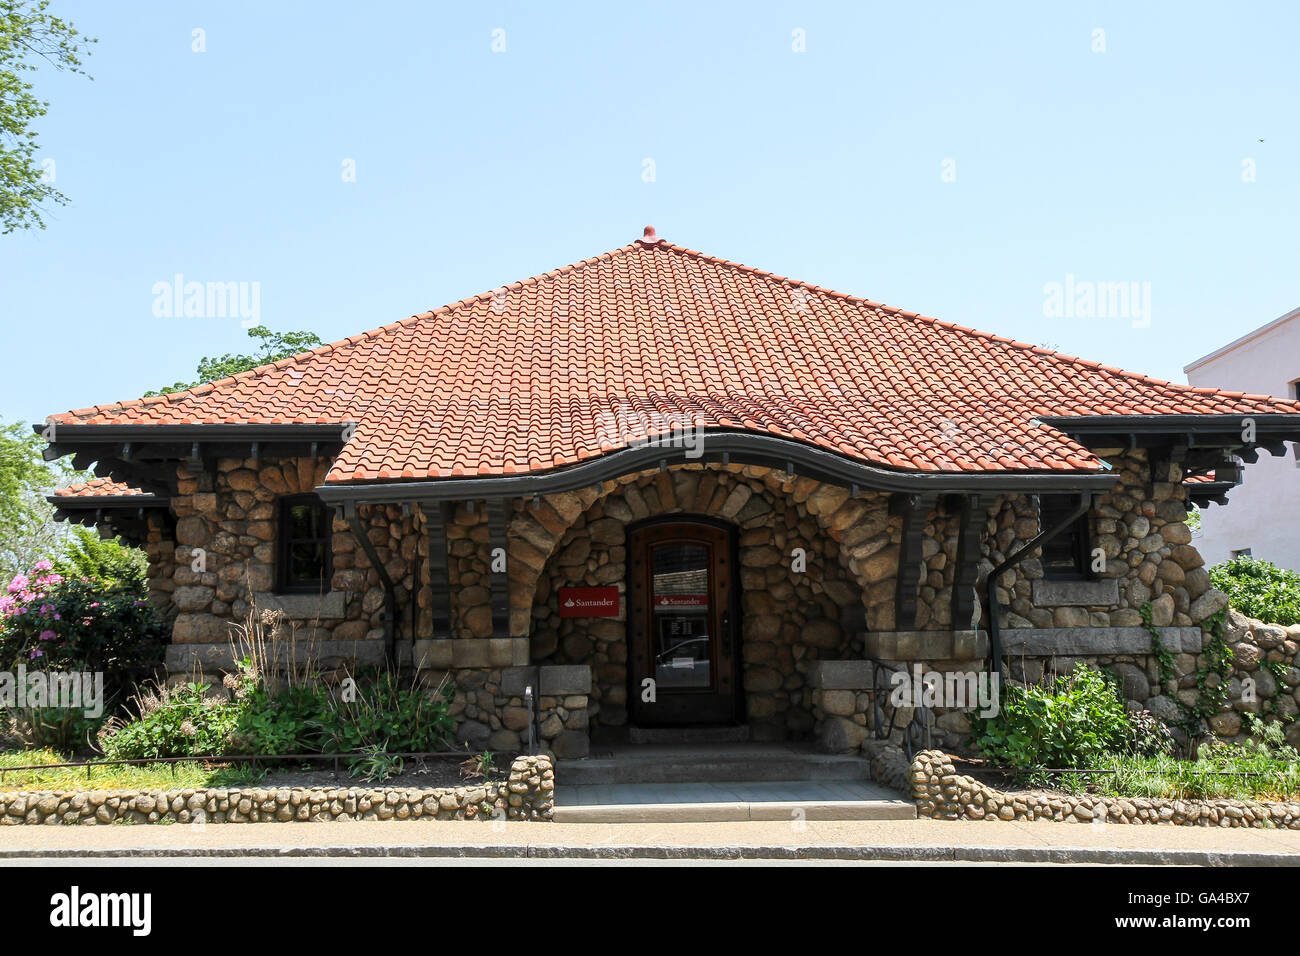 A stone building built in 1905 which now houses a Santander Bank branch in Vineyard Haven, Martha's Vineyard, Massachusetts Stock Photo